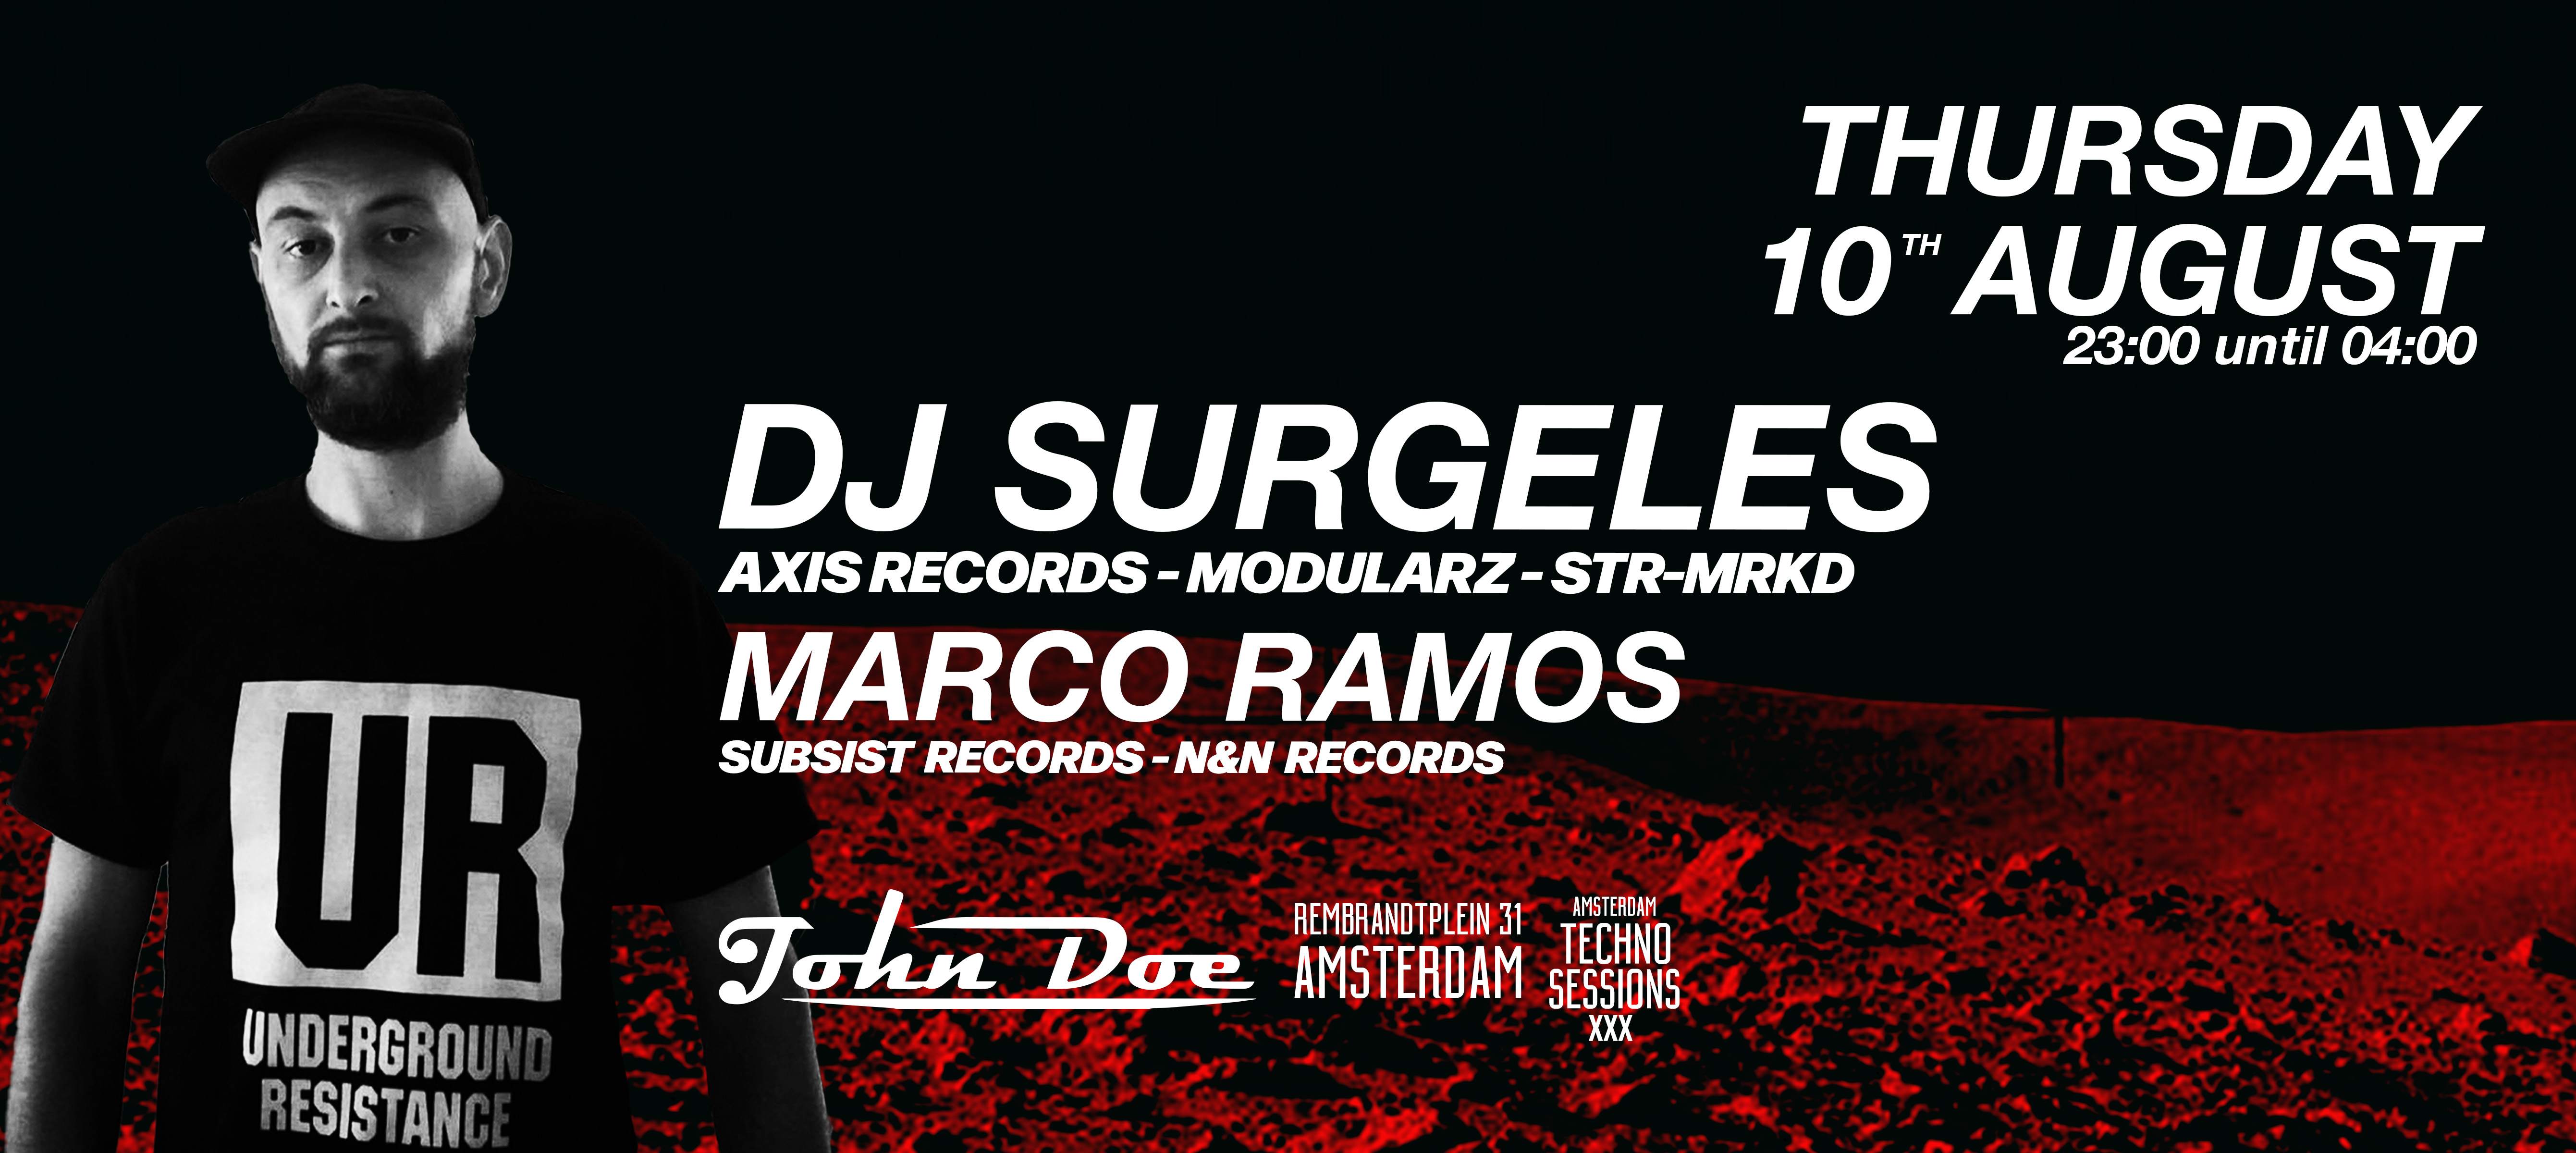 Amsterdam Techno Sessions with DJ Surgeles (Axis Records - Modularz - STR-MRKD) - Página frontal